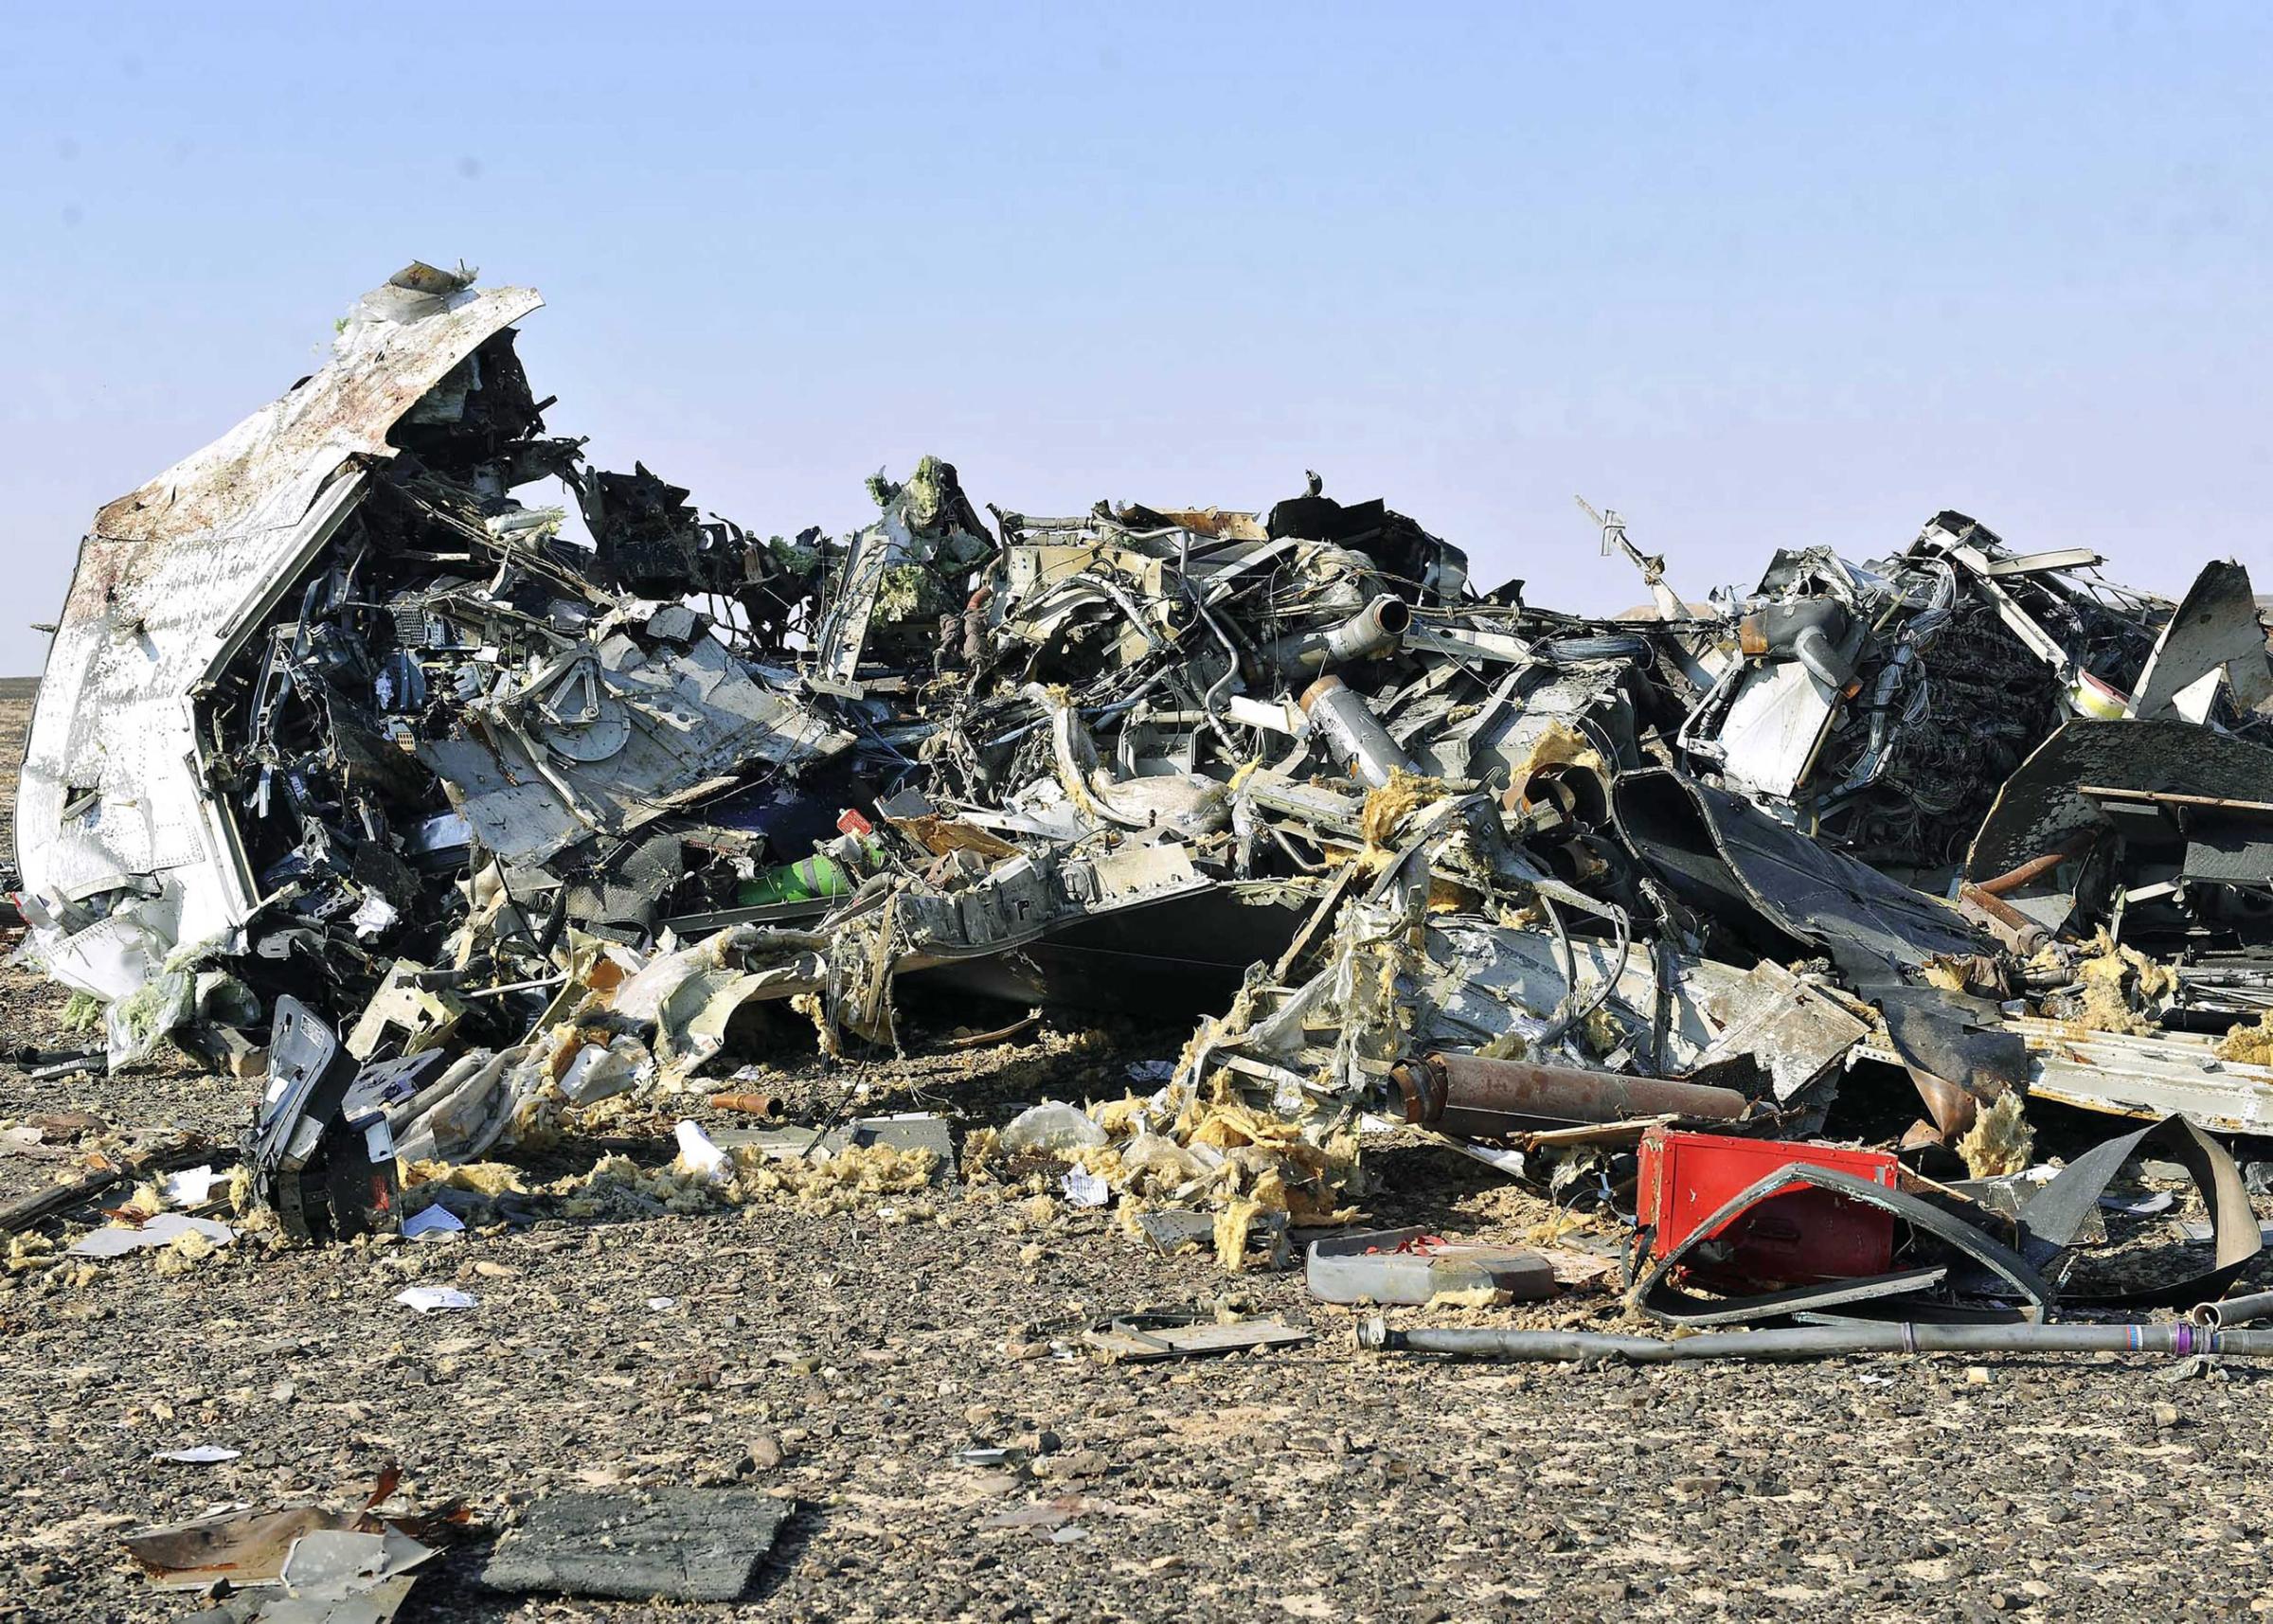 Debris from crashed Russian jet lies strewn across the sand at the site of the crash in the Sinai region in Egypt on Oct. 31, 2015.